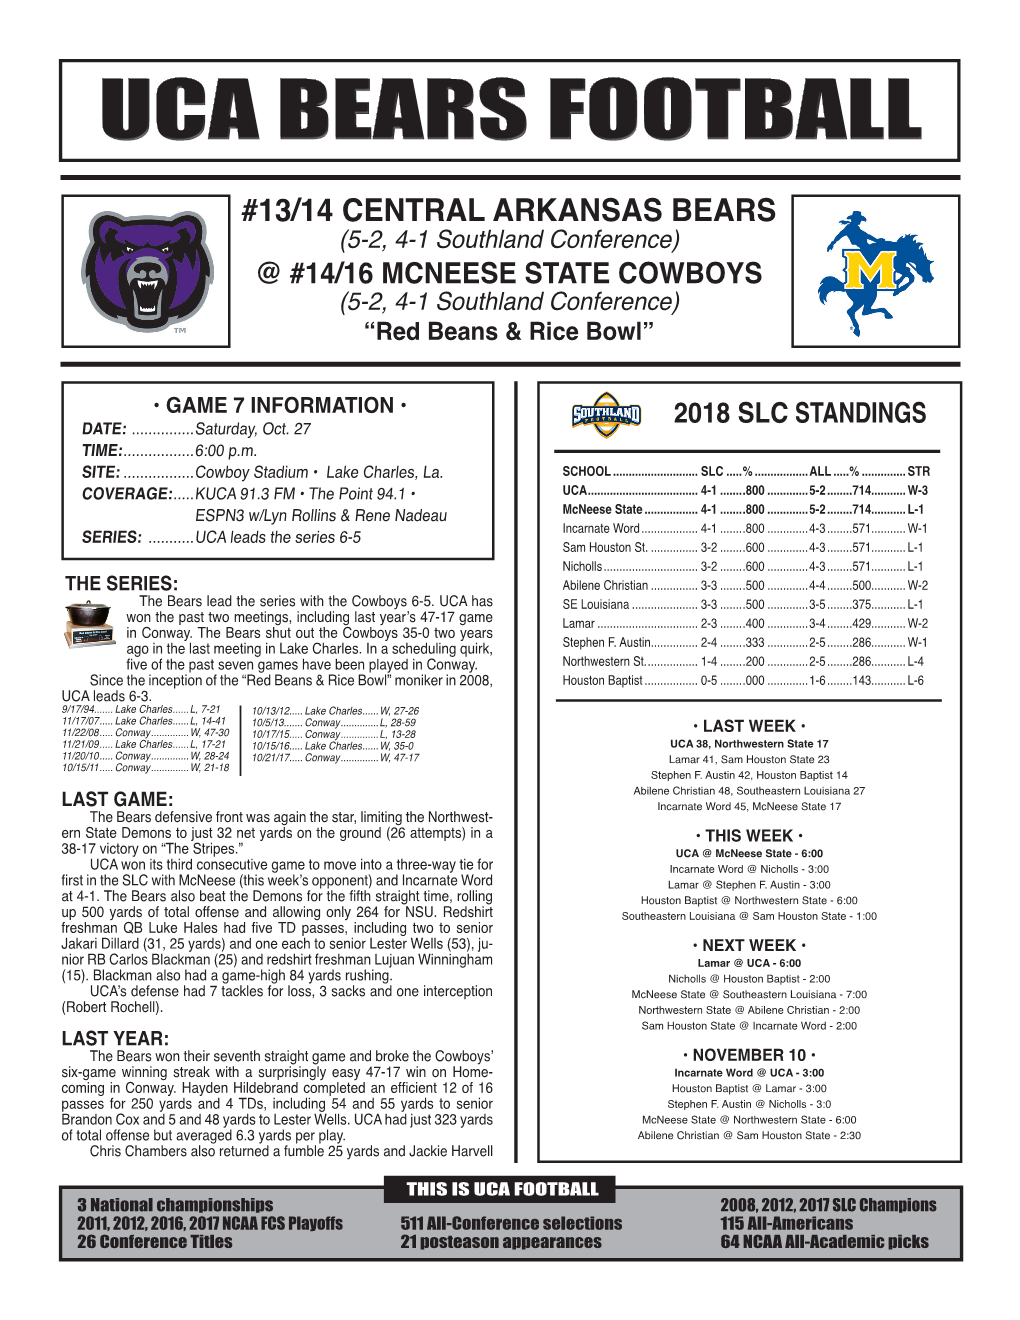 13/14 CENTRAL ARKANSAS BEARS (5-2, 4-1 Southland Conference) @ #14/16 MCNEESE STATE COWBOYS (5-2, 4-1 Southland Conference) “Red Beans & Rice Bowl”